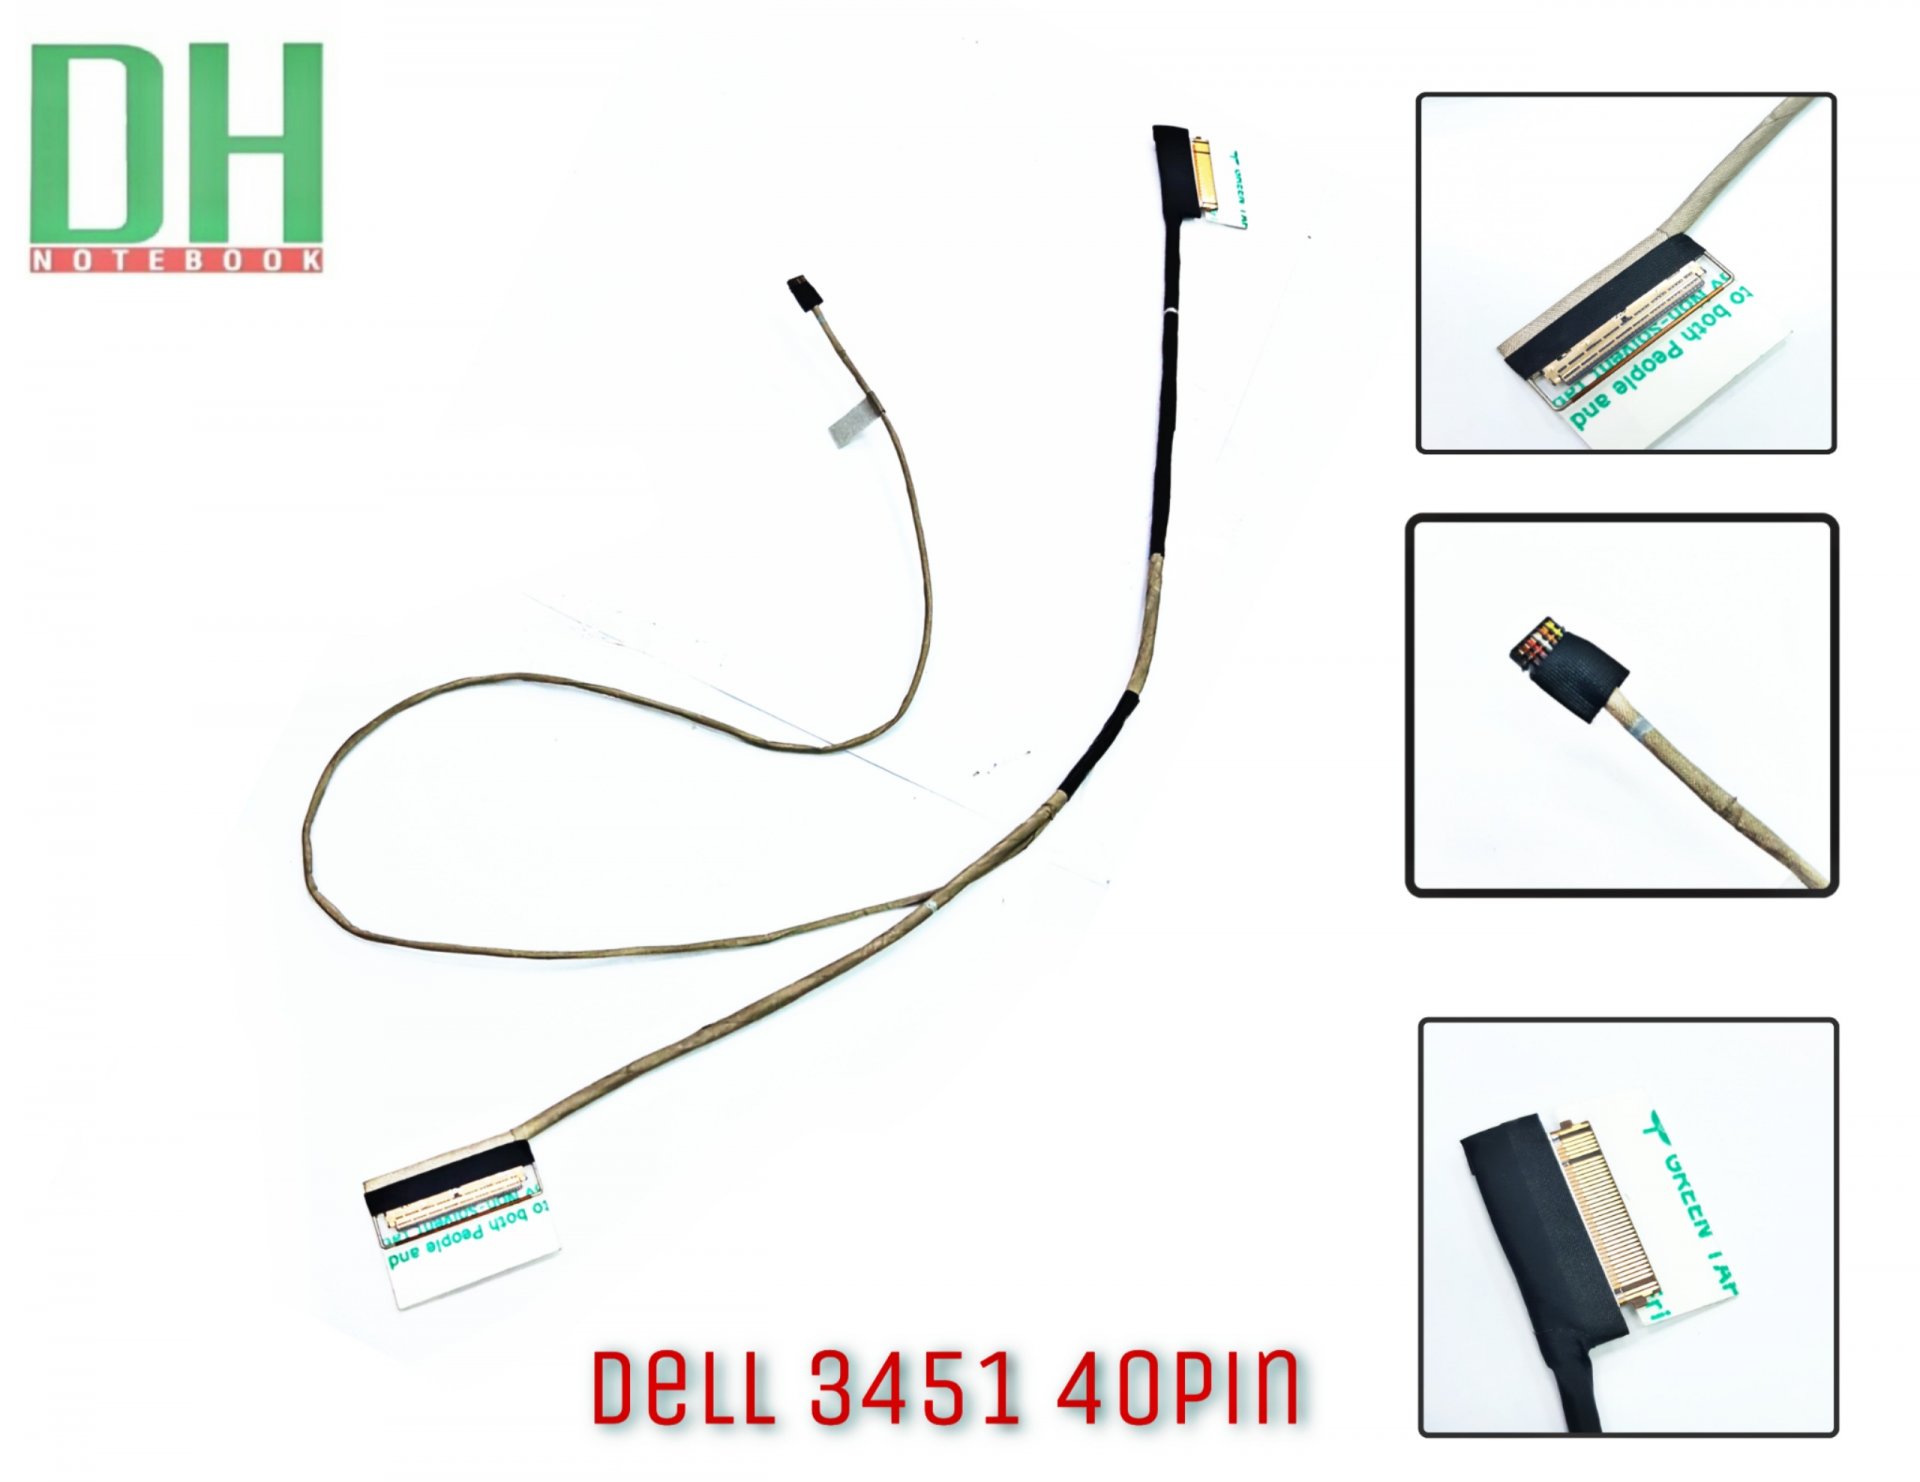 Dell 3451 40pin Video Cable